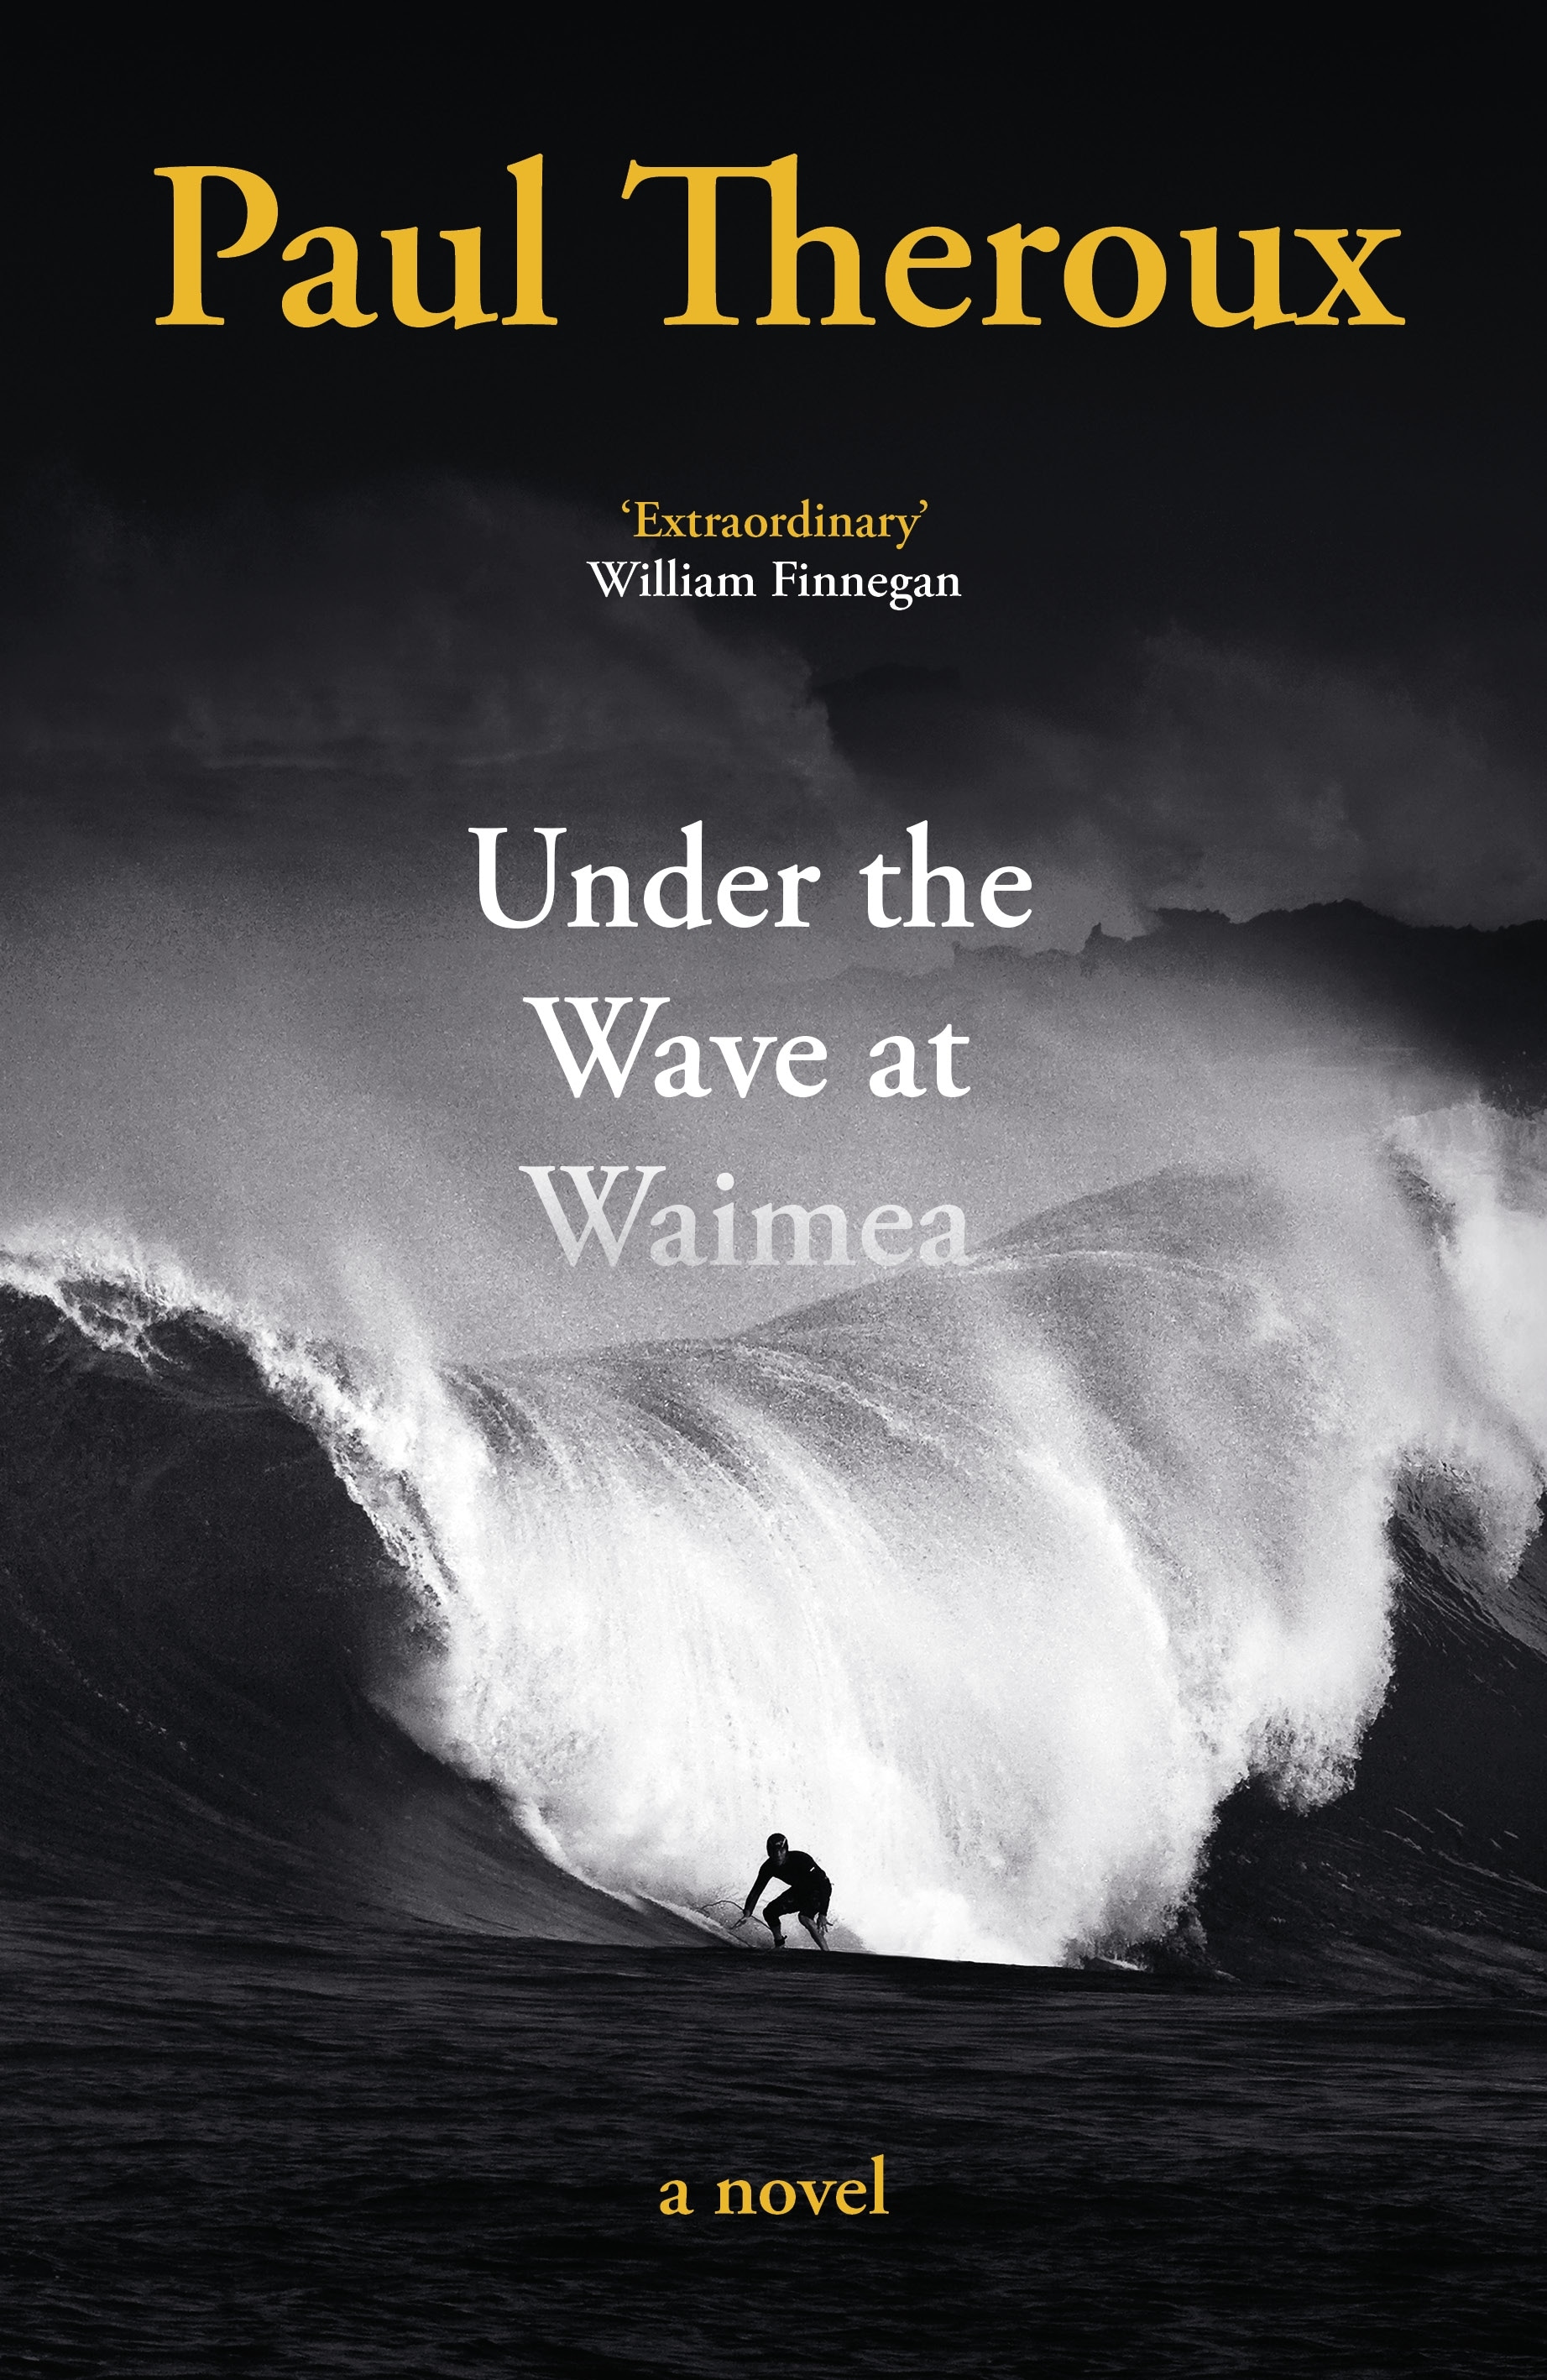 Book “Under the Wave at Waimea” by Paul Theroux — April 22, 2021